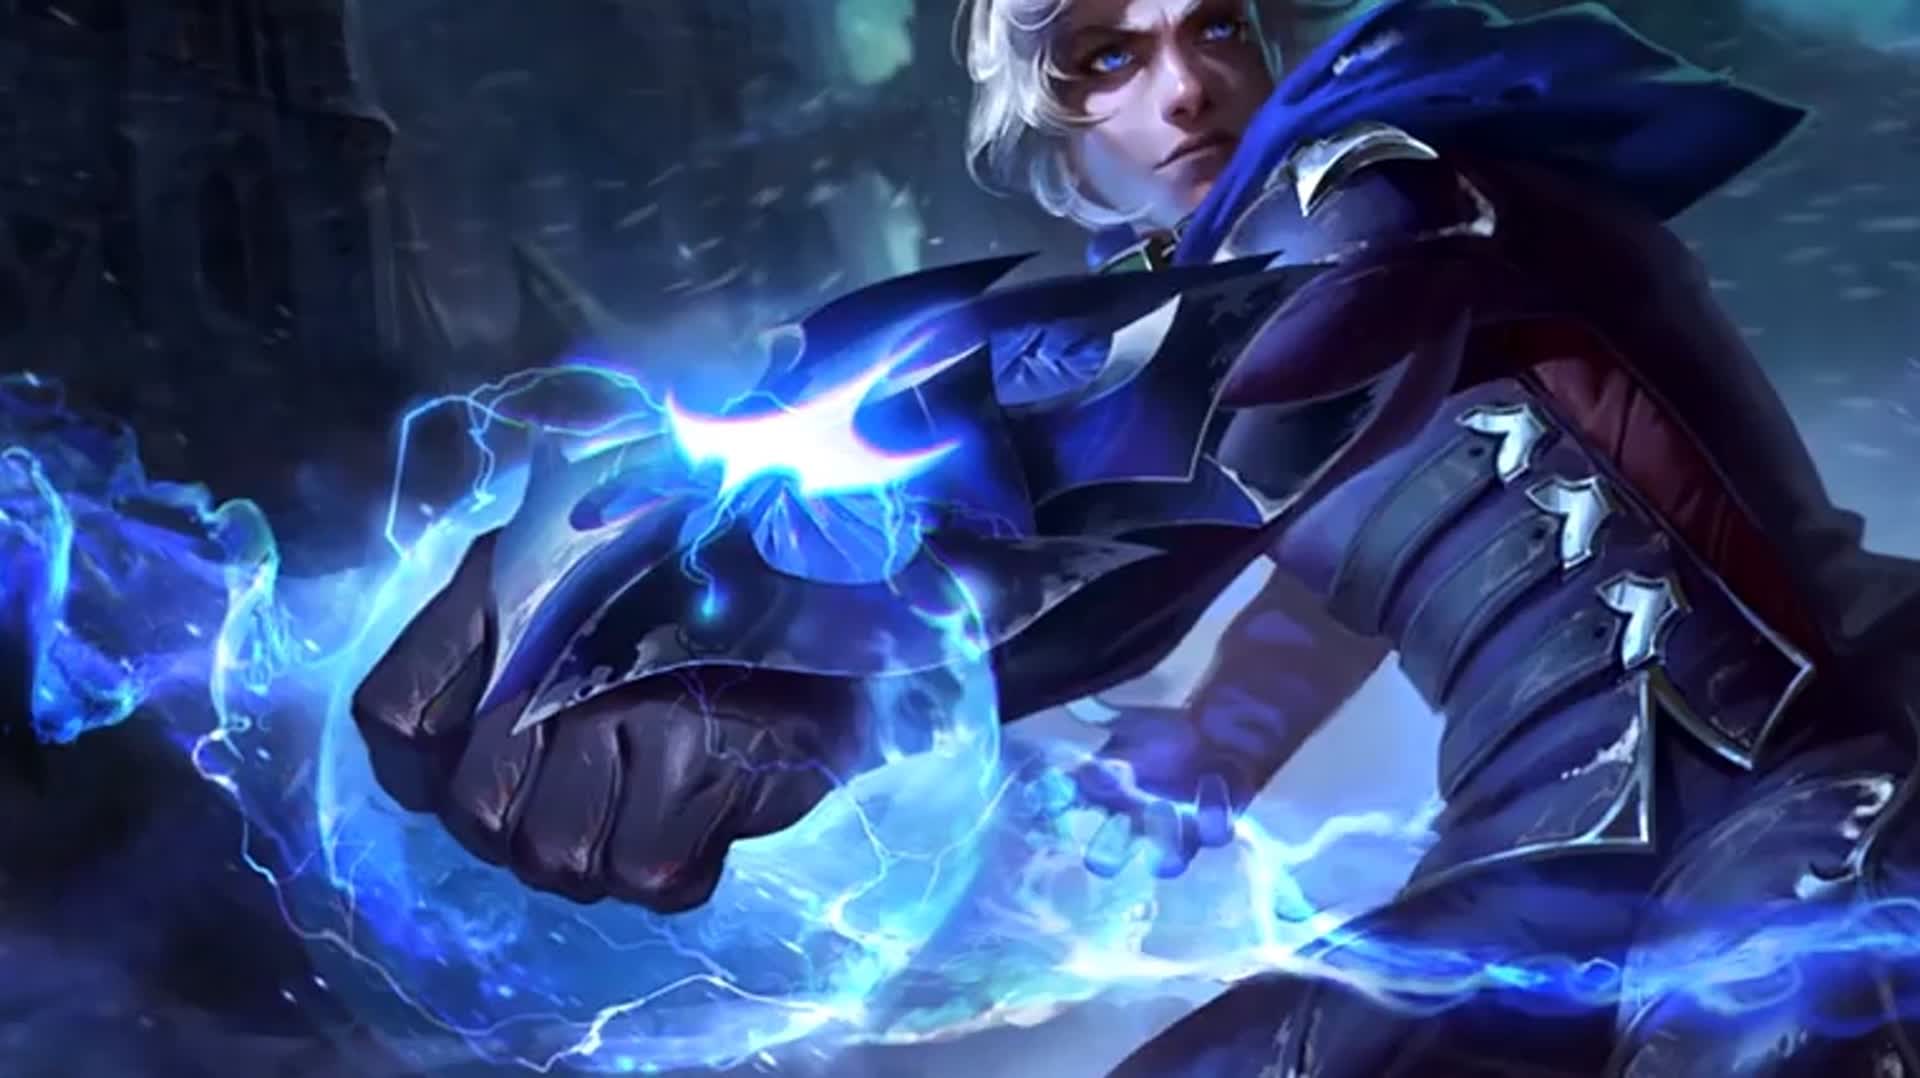 frosted ezreal render